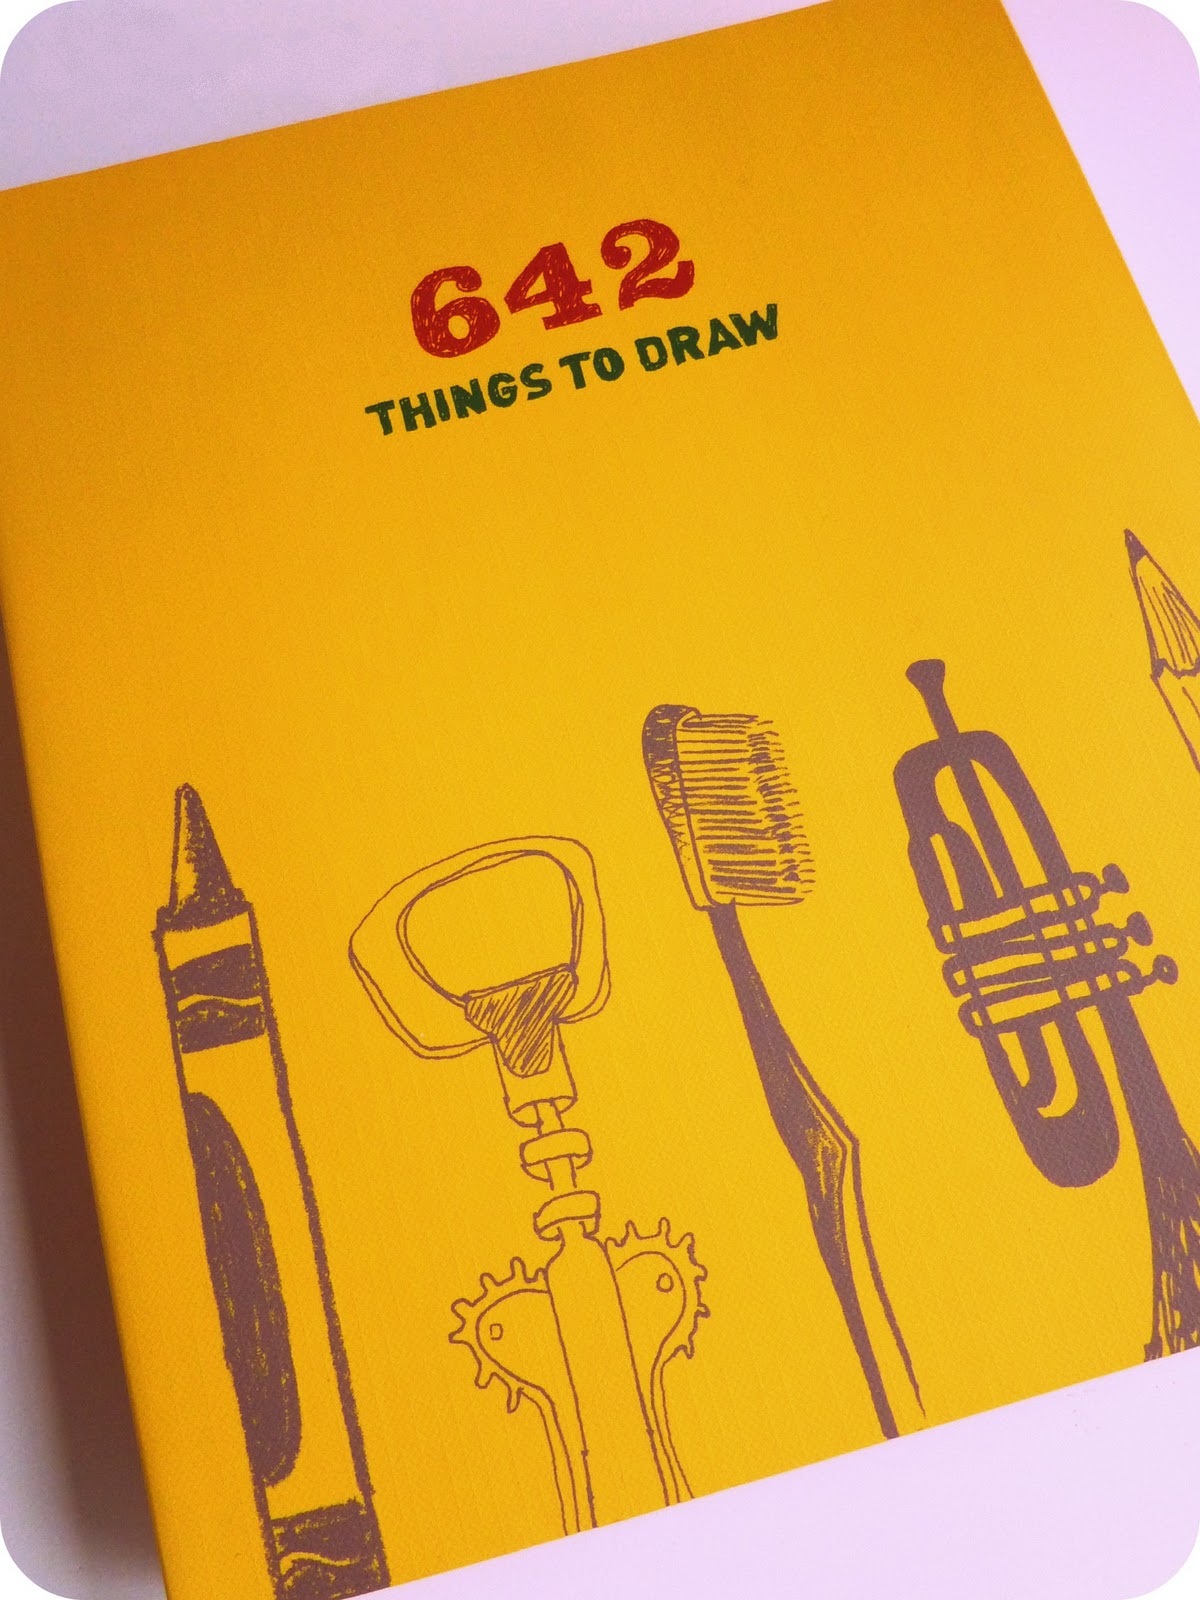 642 Things to Draw.